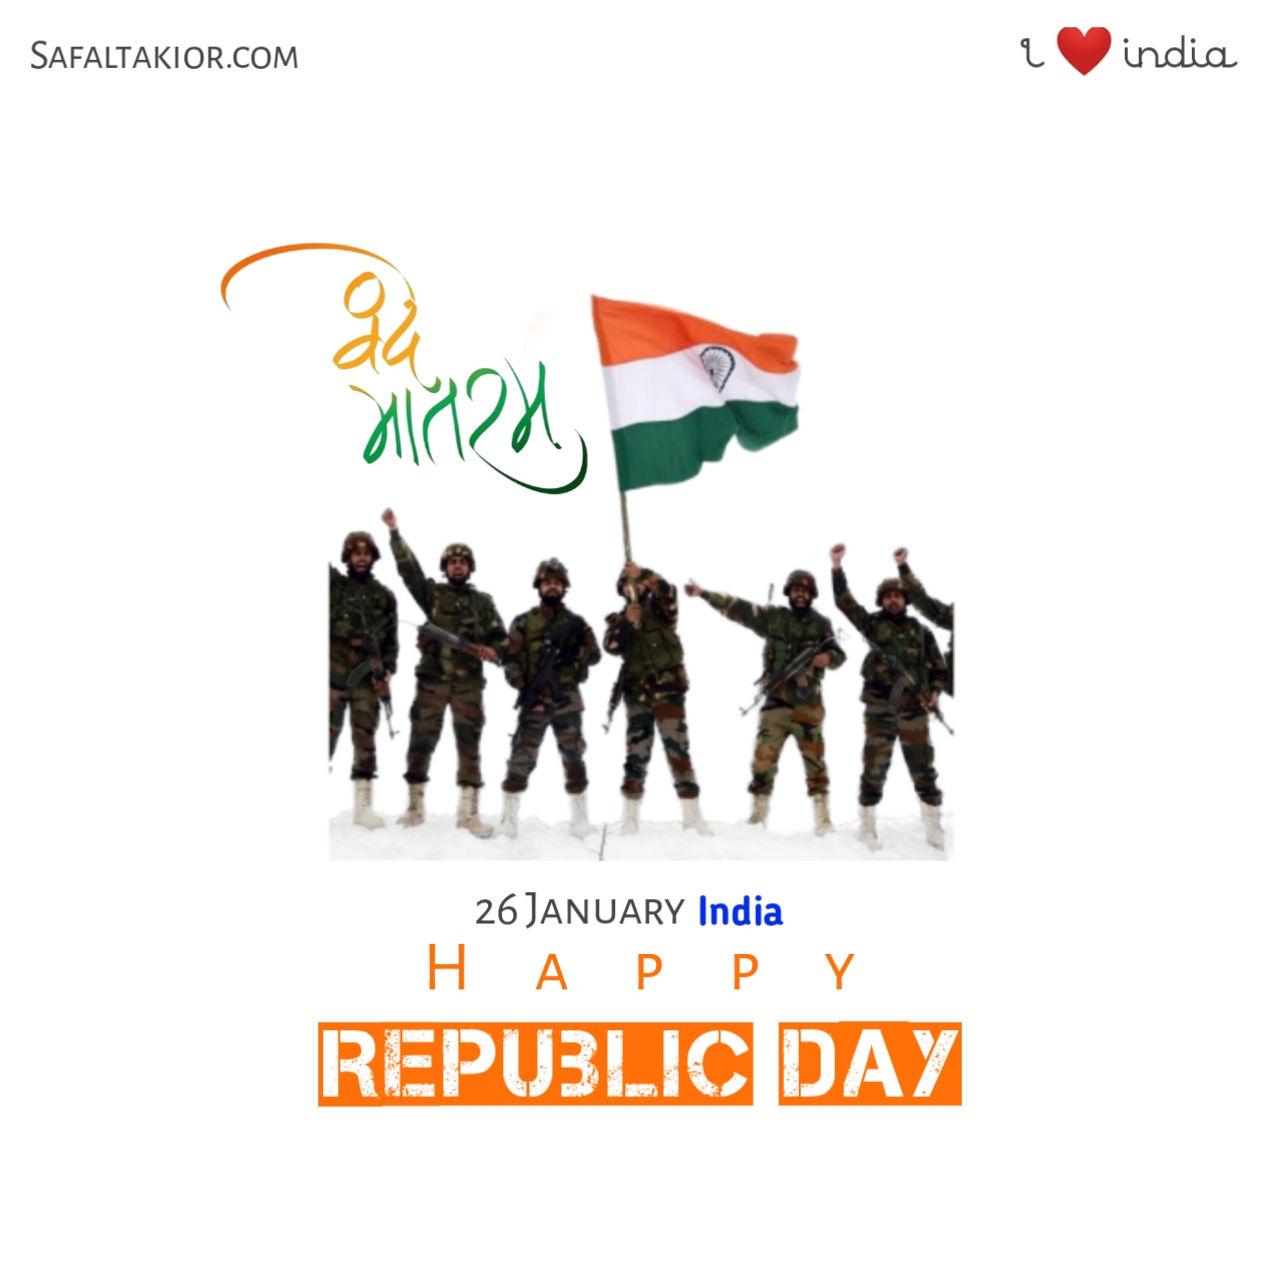 Indian Army Republic Day images